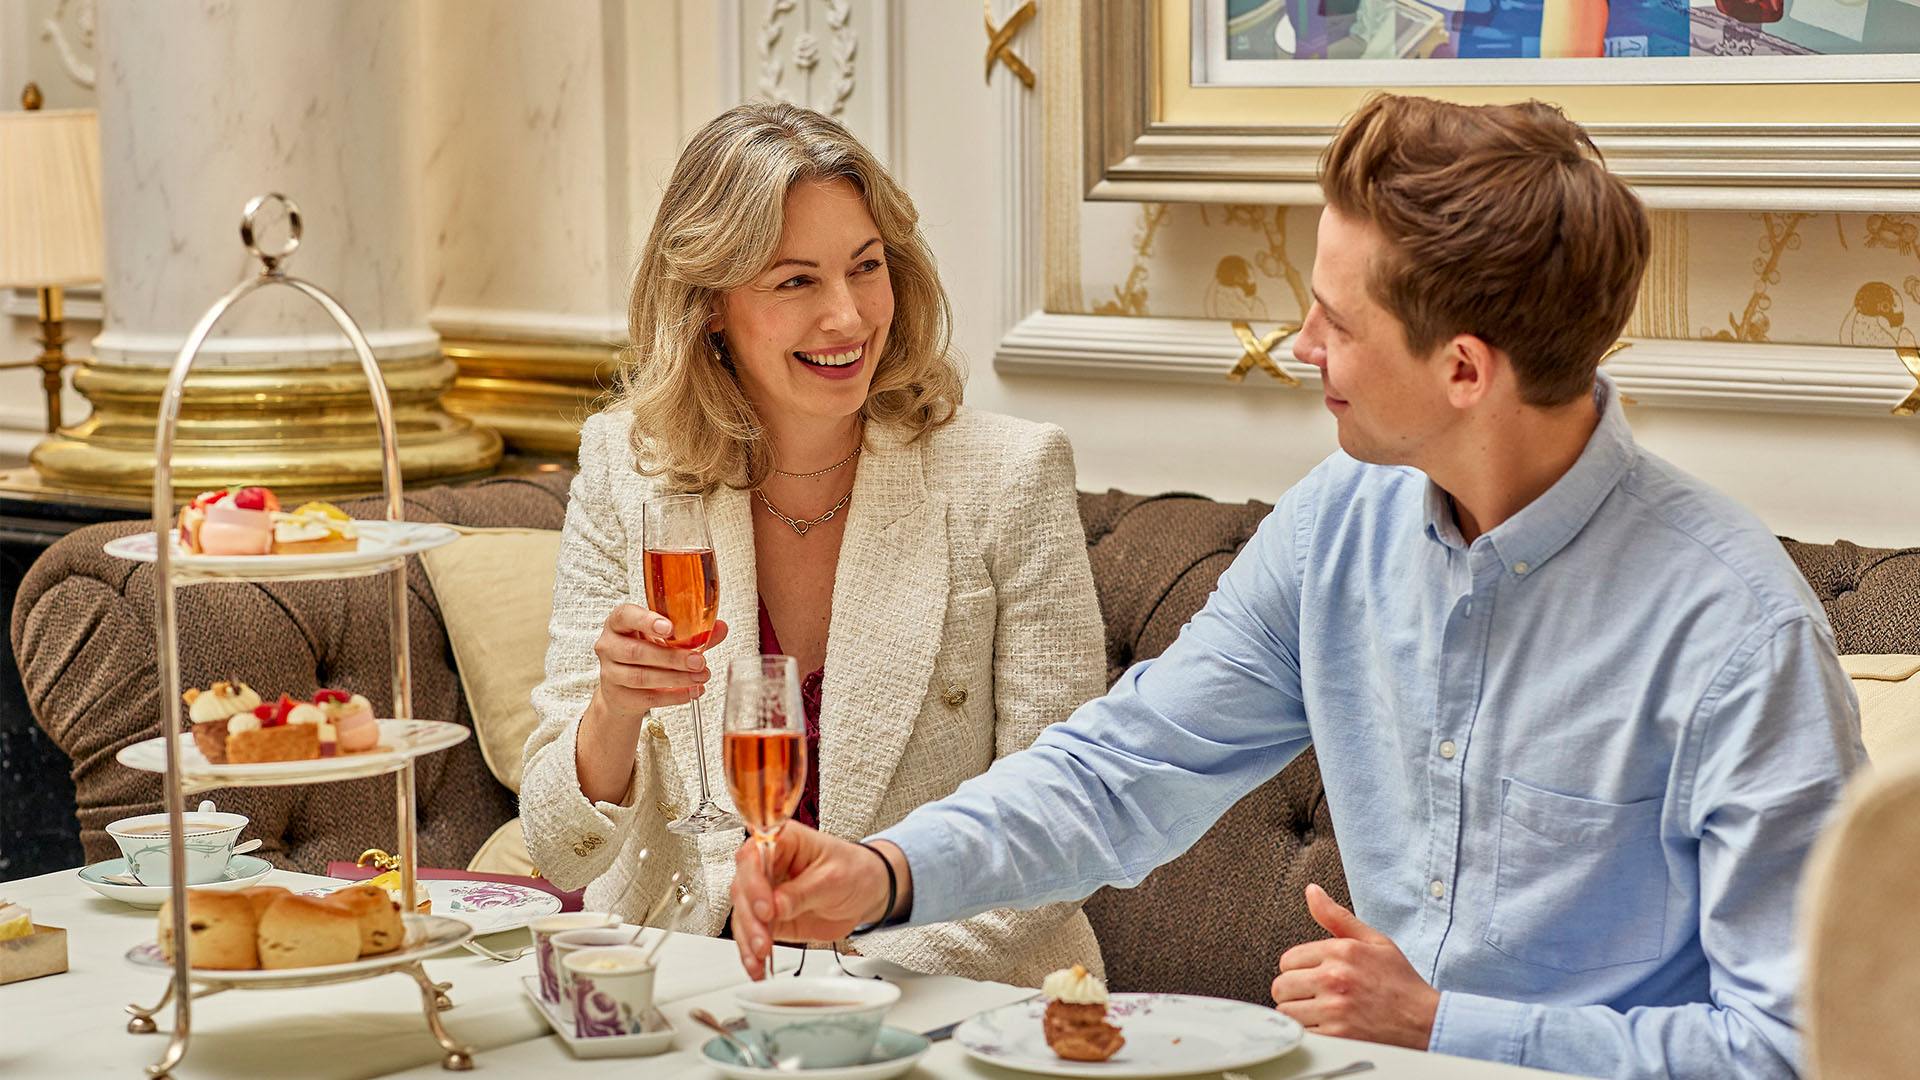 Afternoon Tea at The Savoy | Afternoon Tea London | The Savoy